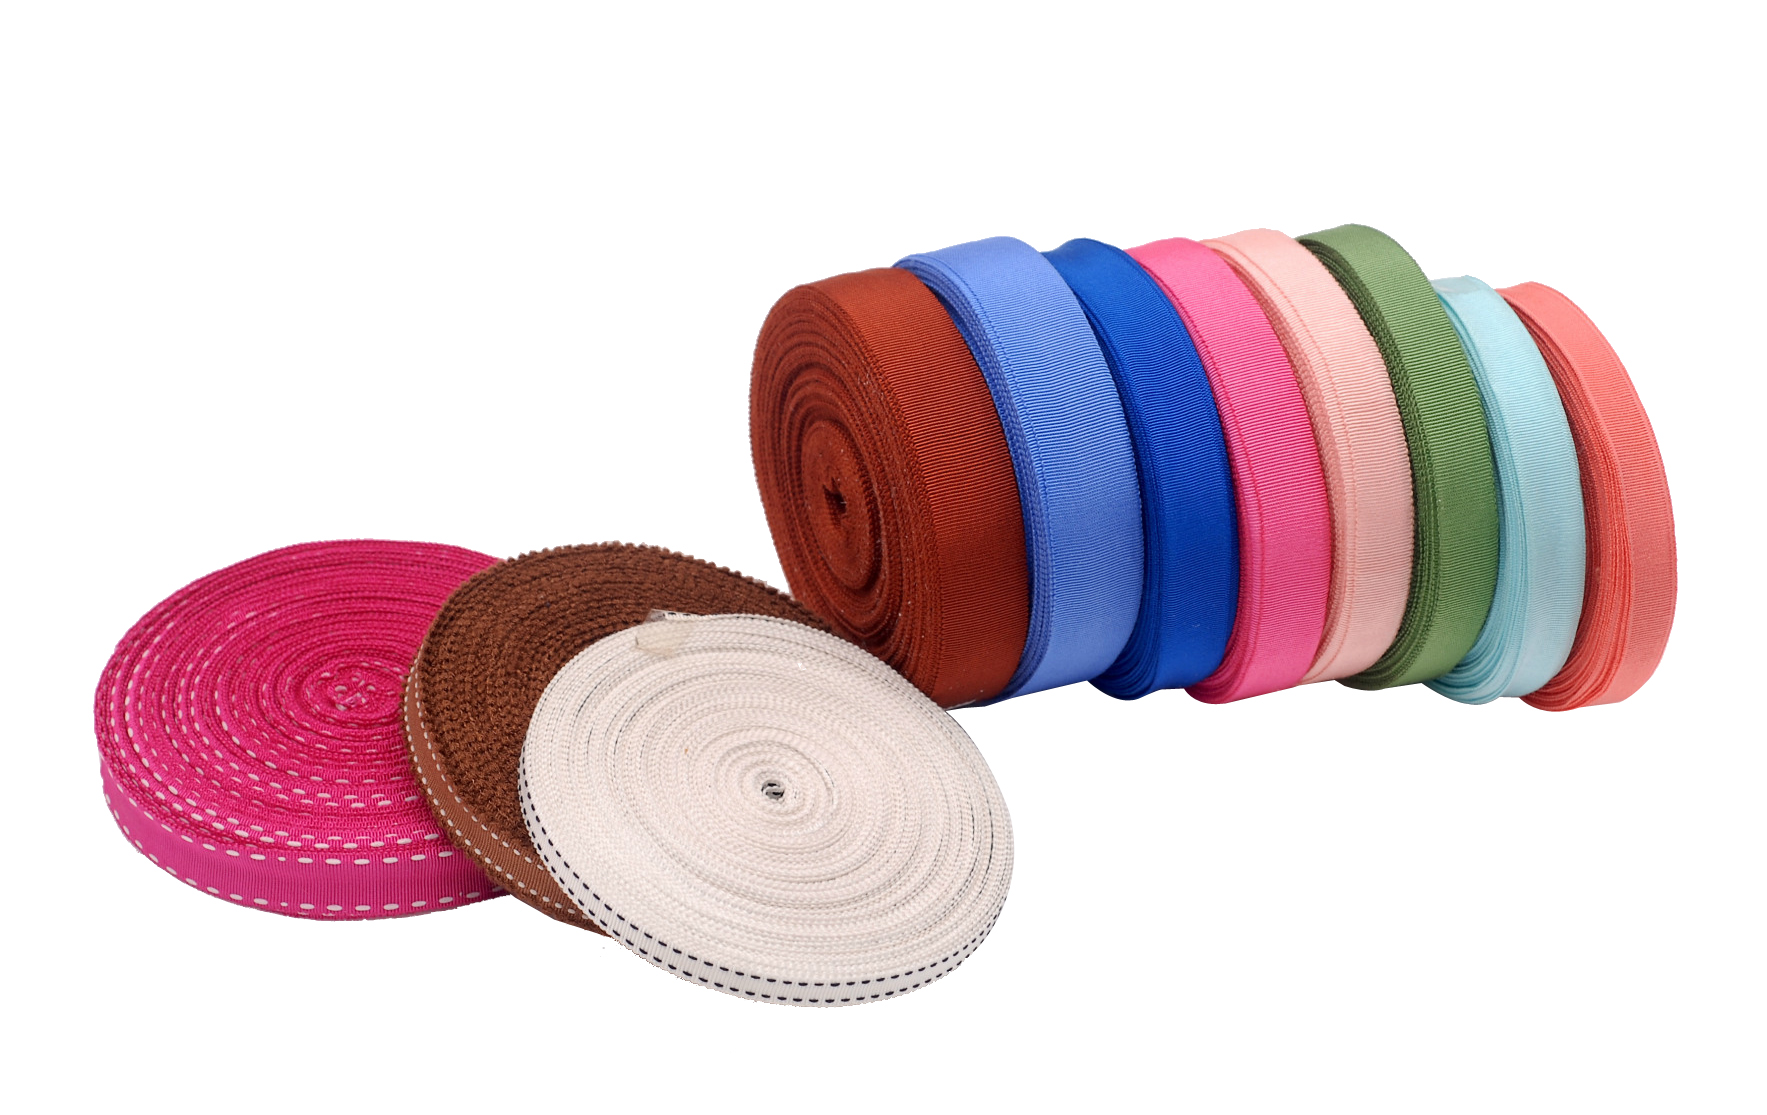 Colourful interchangeable strap for bicycle helmet